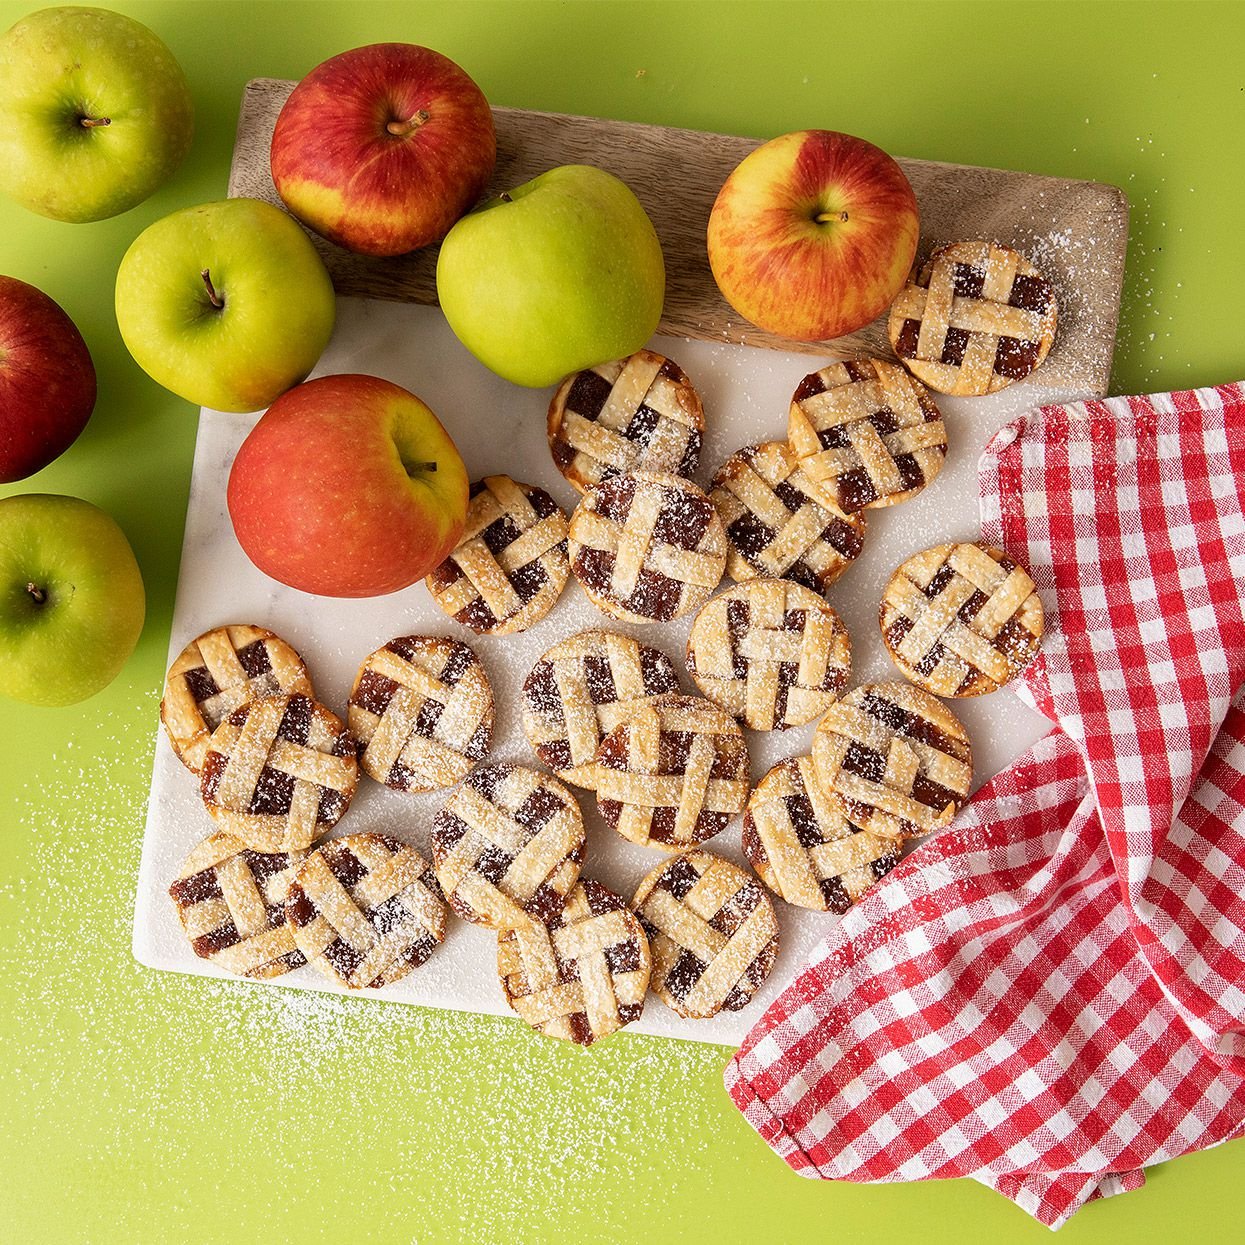 13 Apple Pie Desserts for Apple Pie Flavor Without the Work